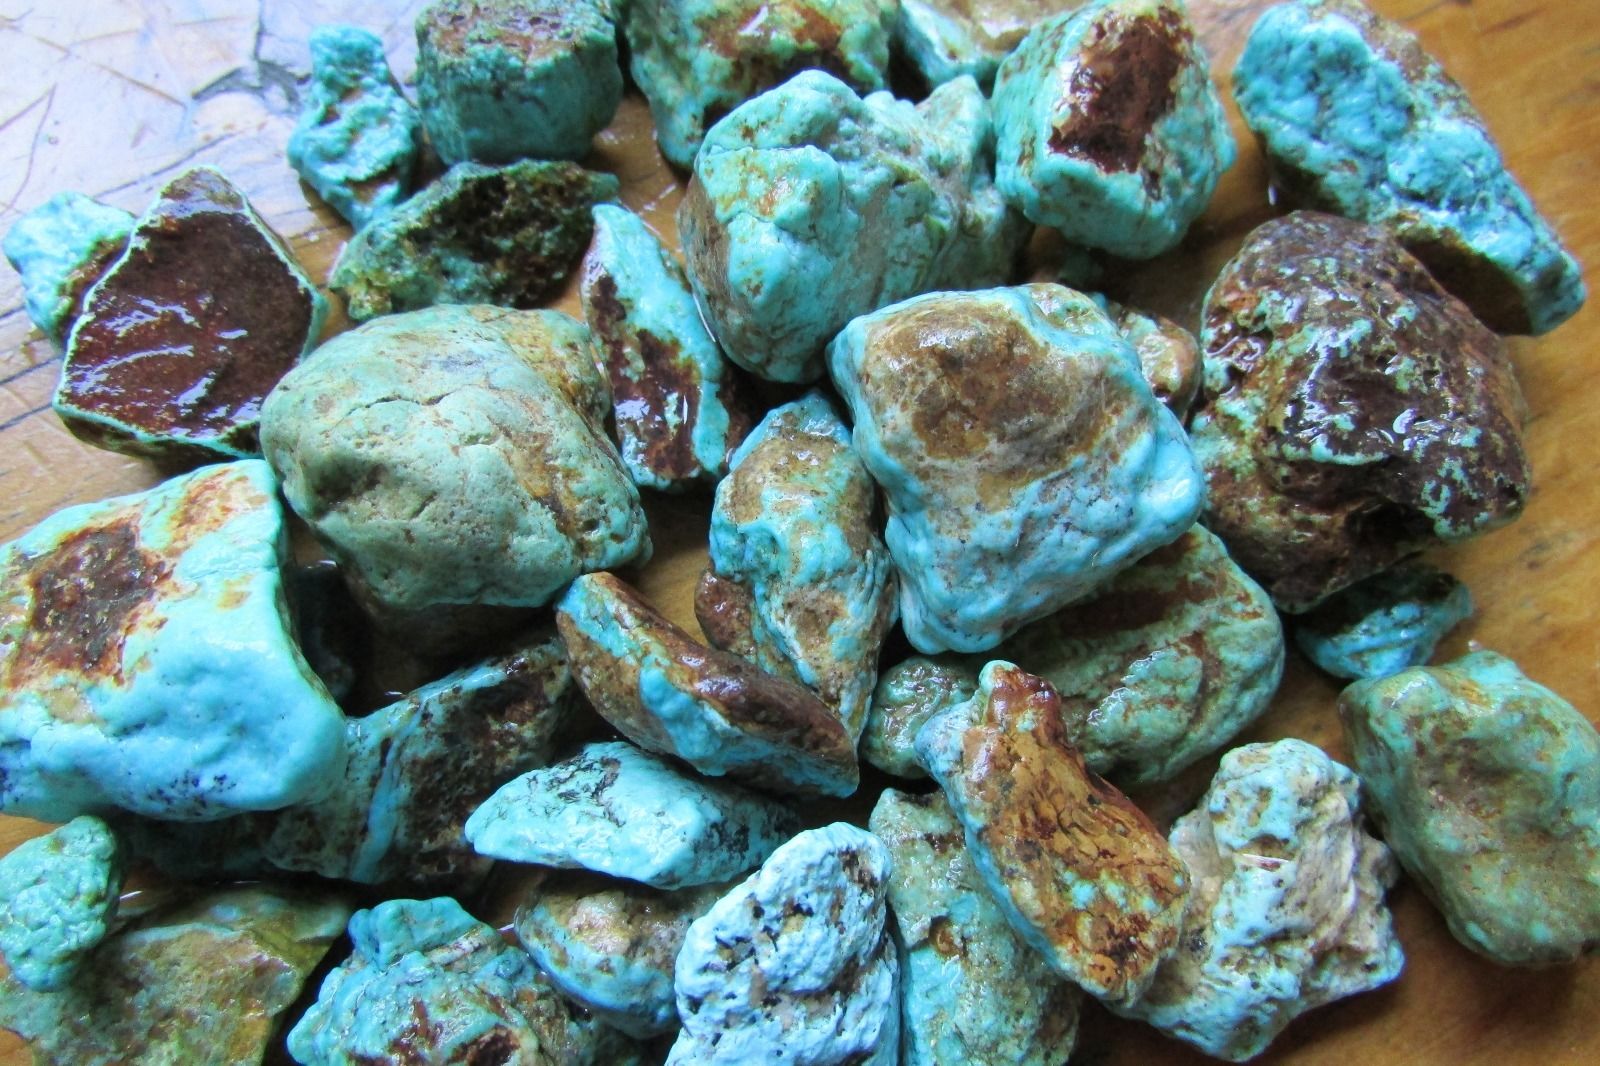 Tucson Lapidary buys natural turquoise